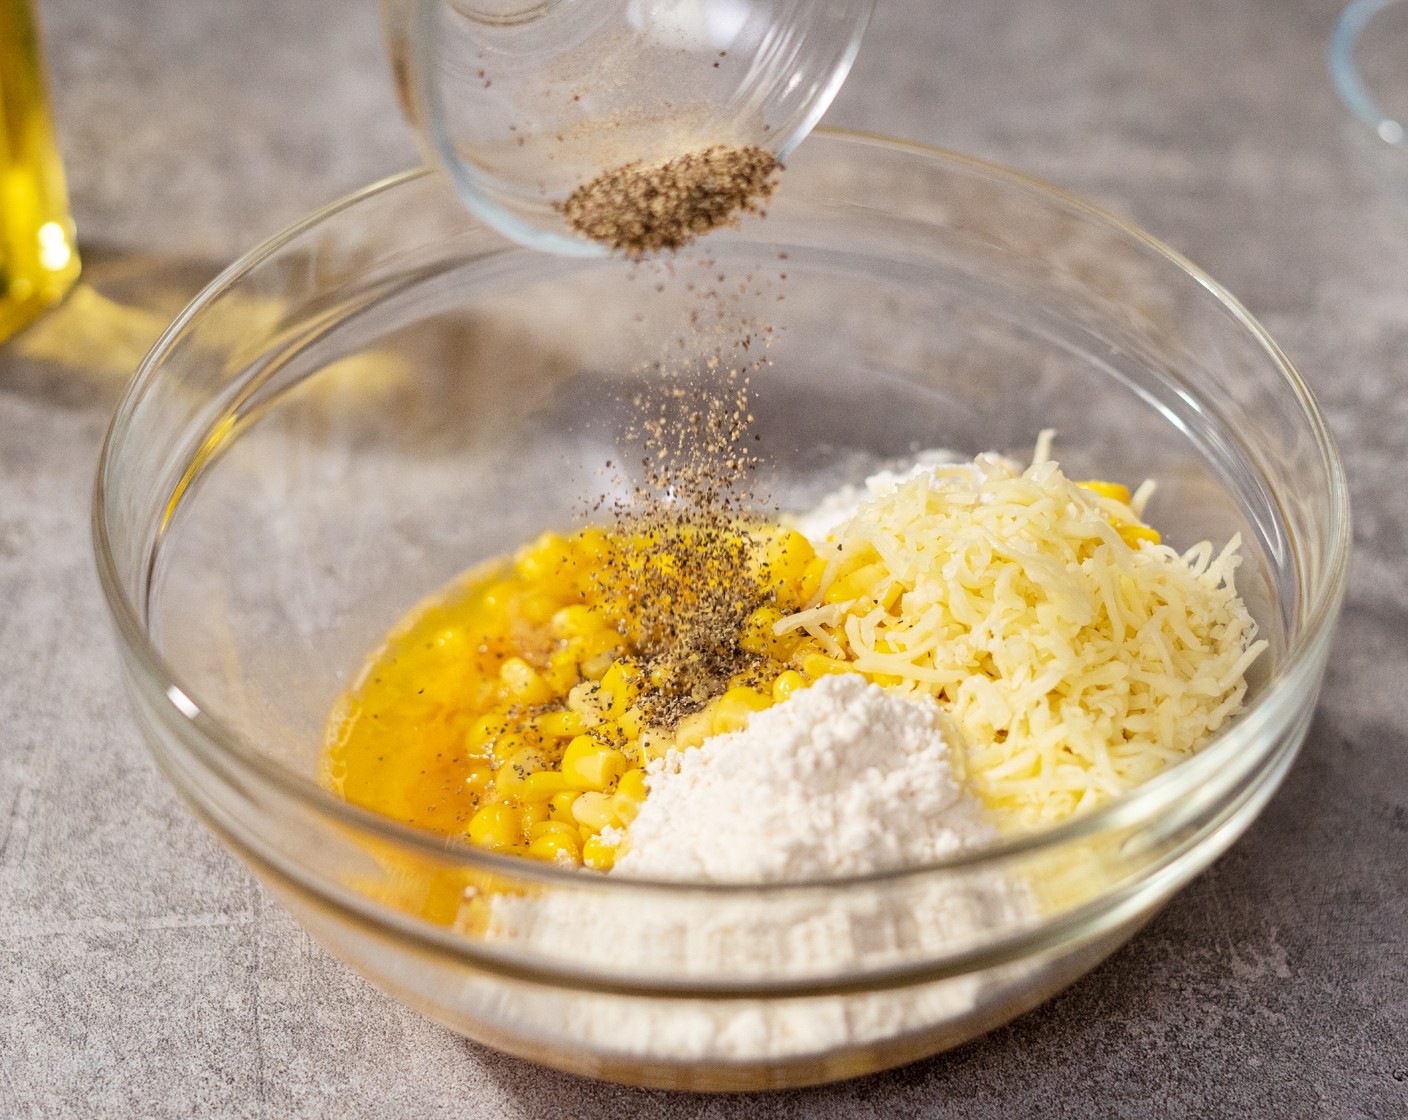 step 2 In a large mixing bowl, combine Corn (1 can), Egg (1), All-Purpose Flour (1/4 cup), Shredded Mozzarella Cheese (1/4 cup), Butter (1 Tbsp), Baking Powder (1/2 tsp), Ground Black Pepper (1/2 tsp), and Salt (1/4 tsp). Let it sit in the fridge for 20 minutes up to overnight.